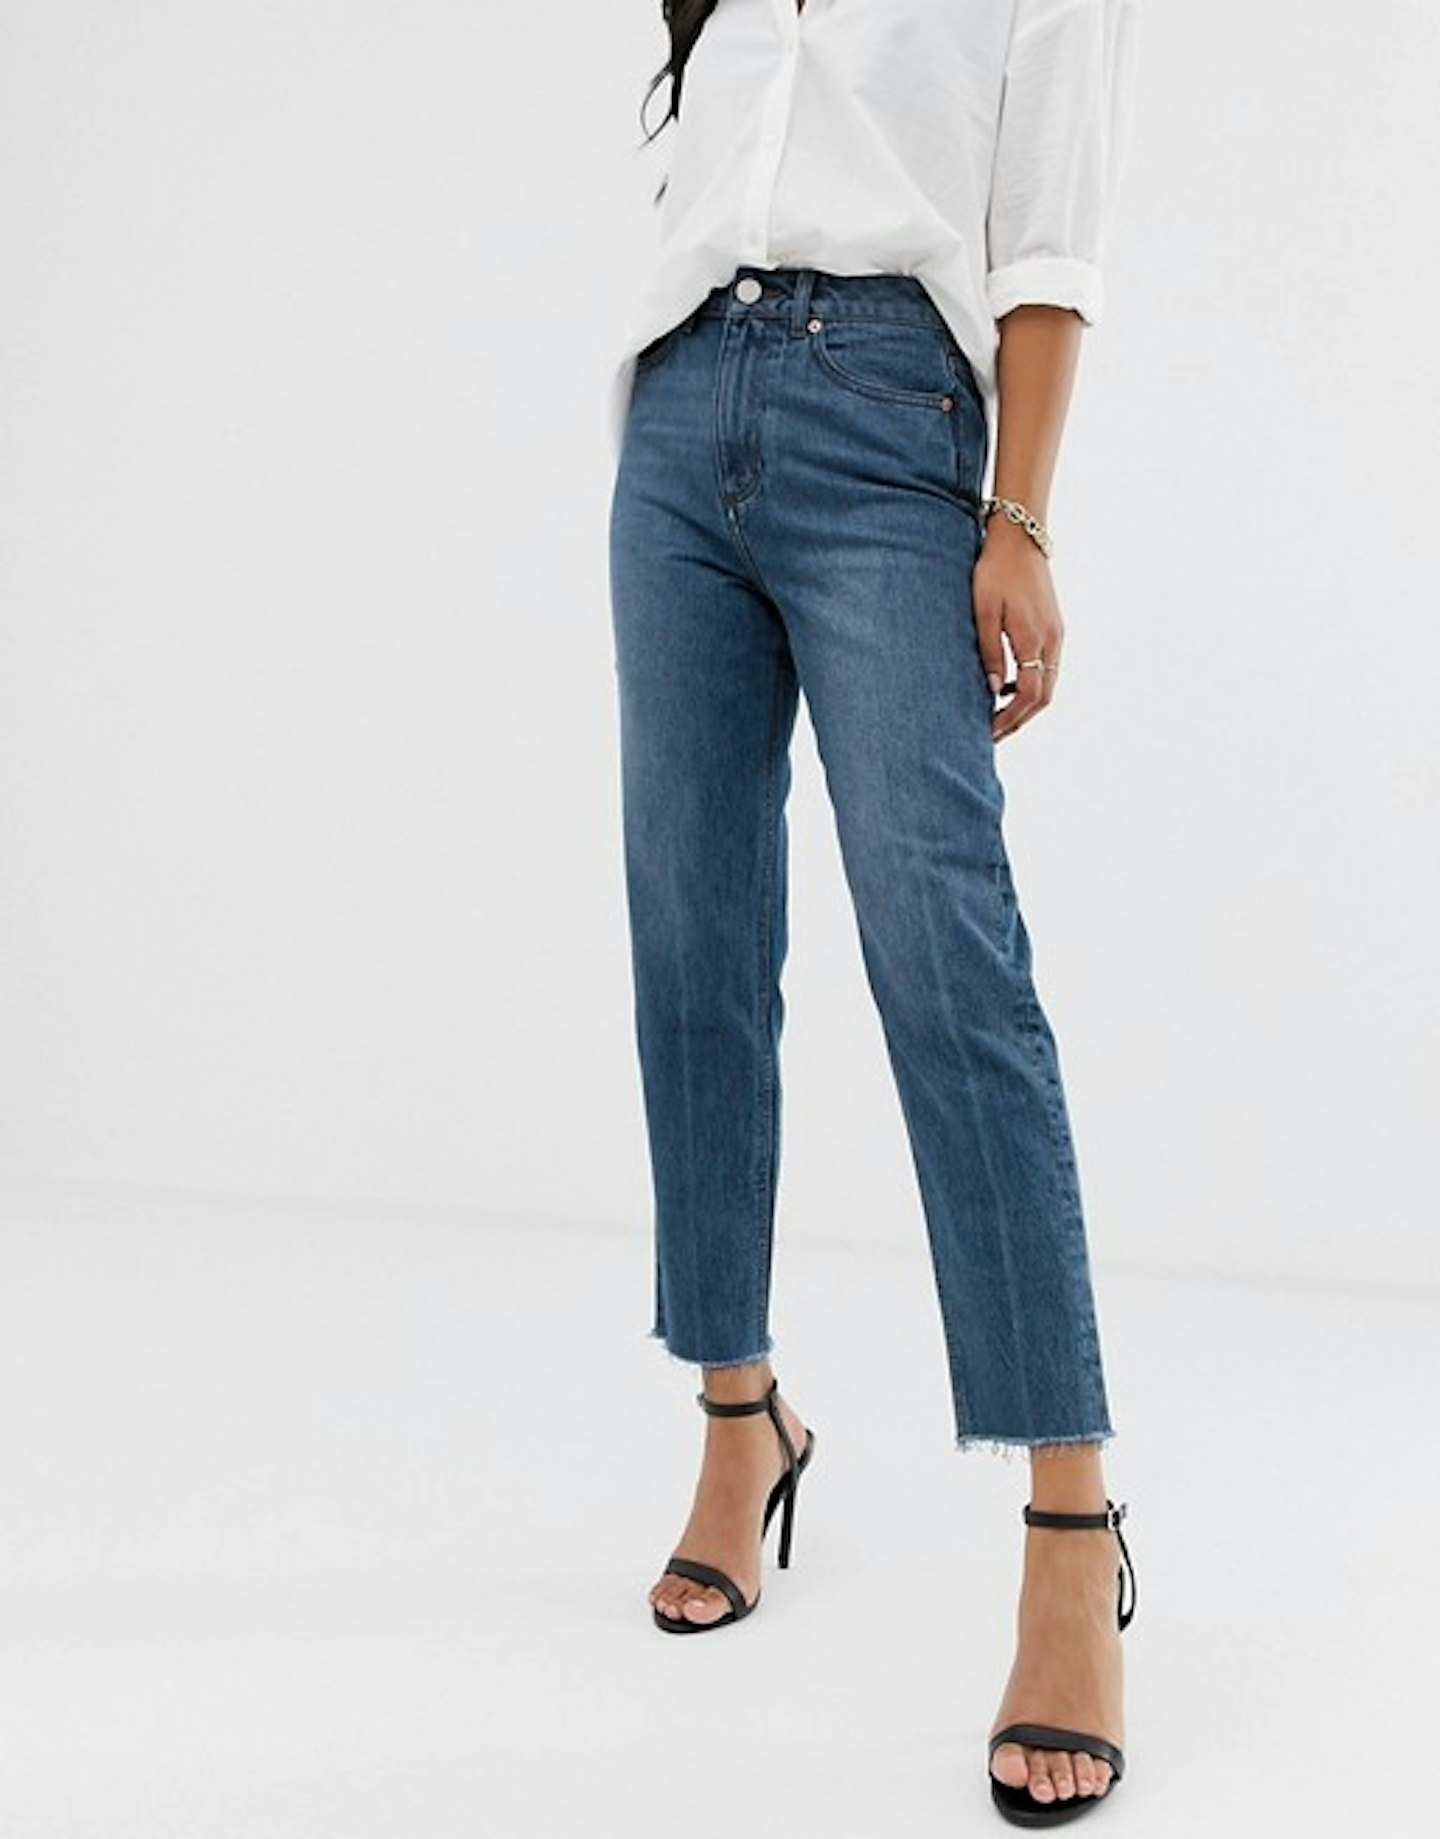 ASOS, Recycled Jeans, £32